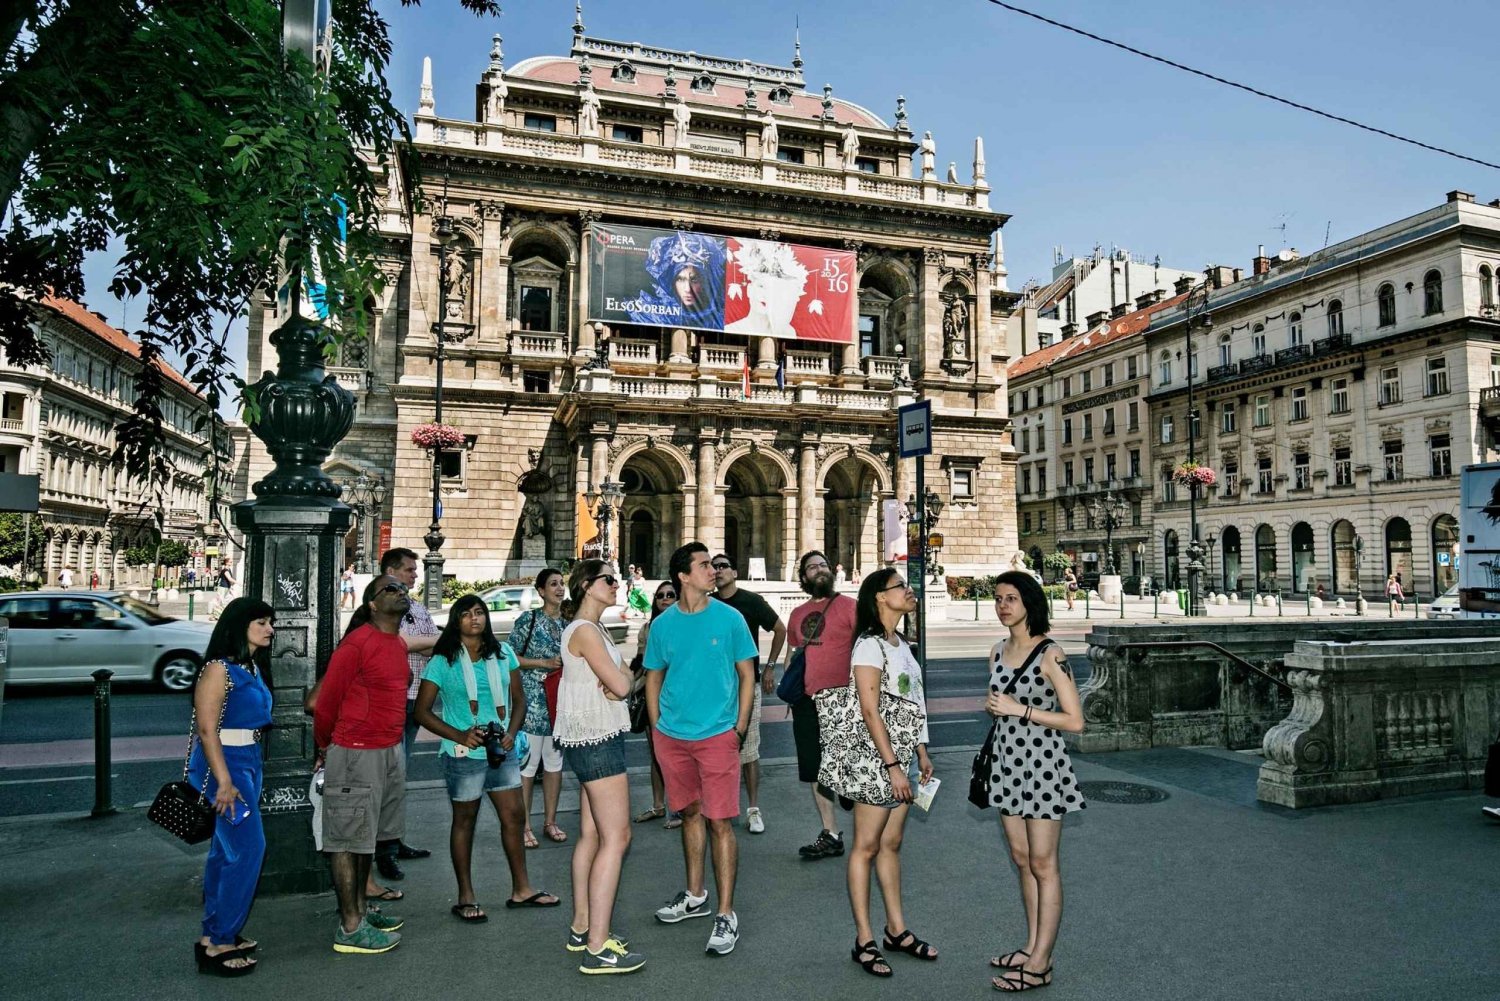 Budapest 3.5 Hour Private Walking Tour with Strudel Stop